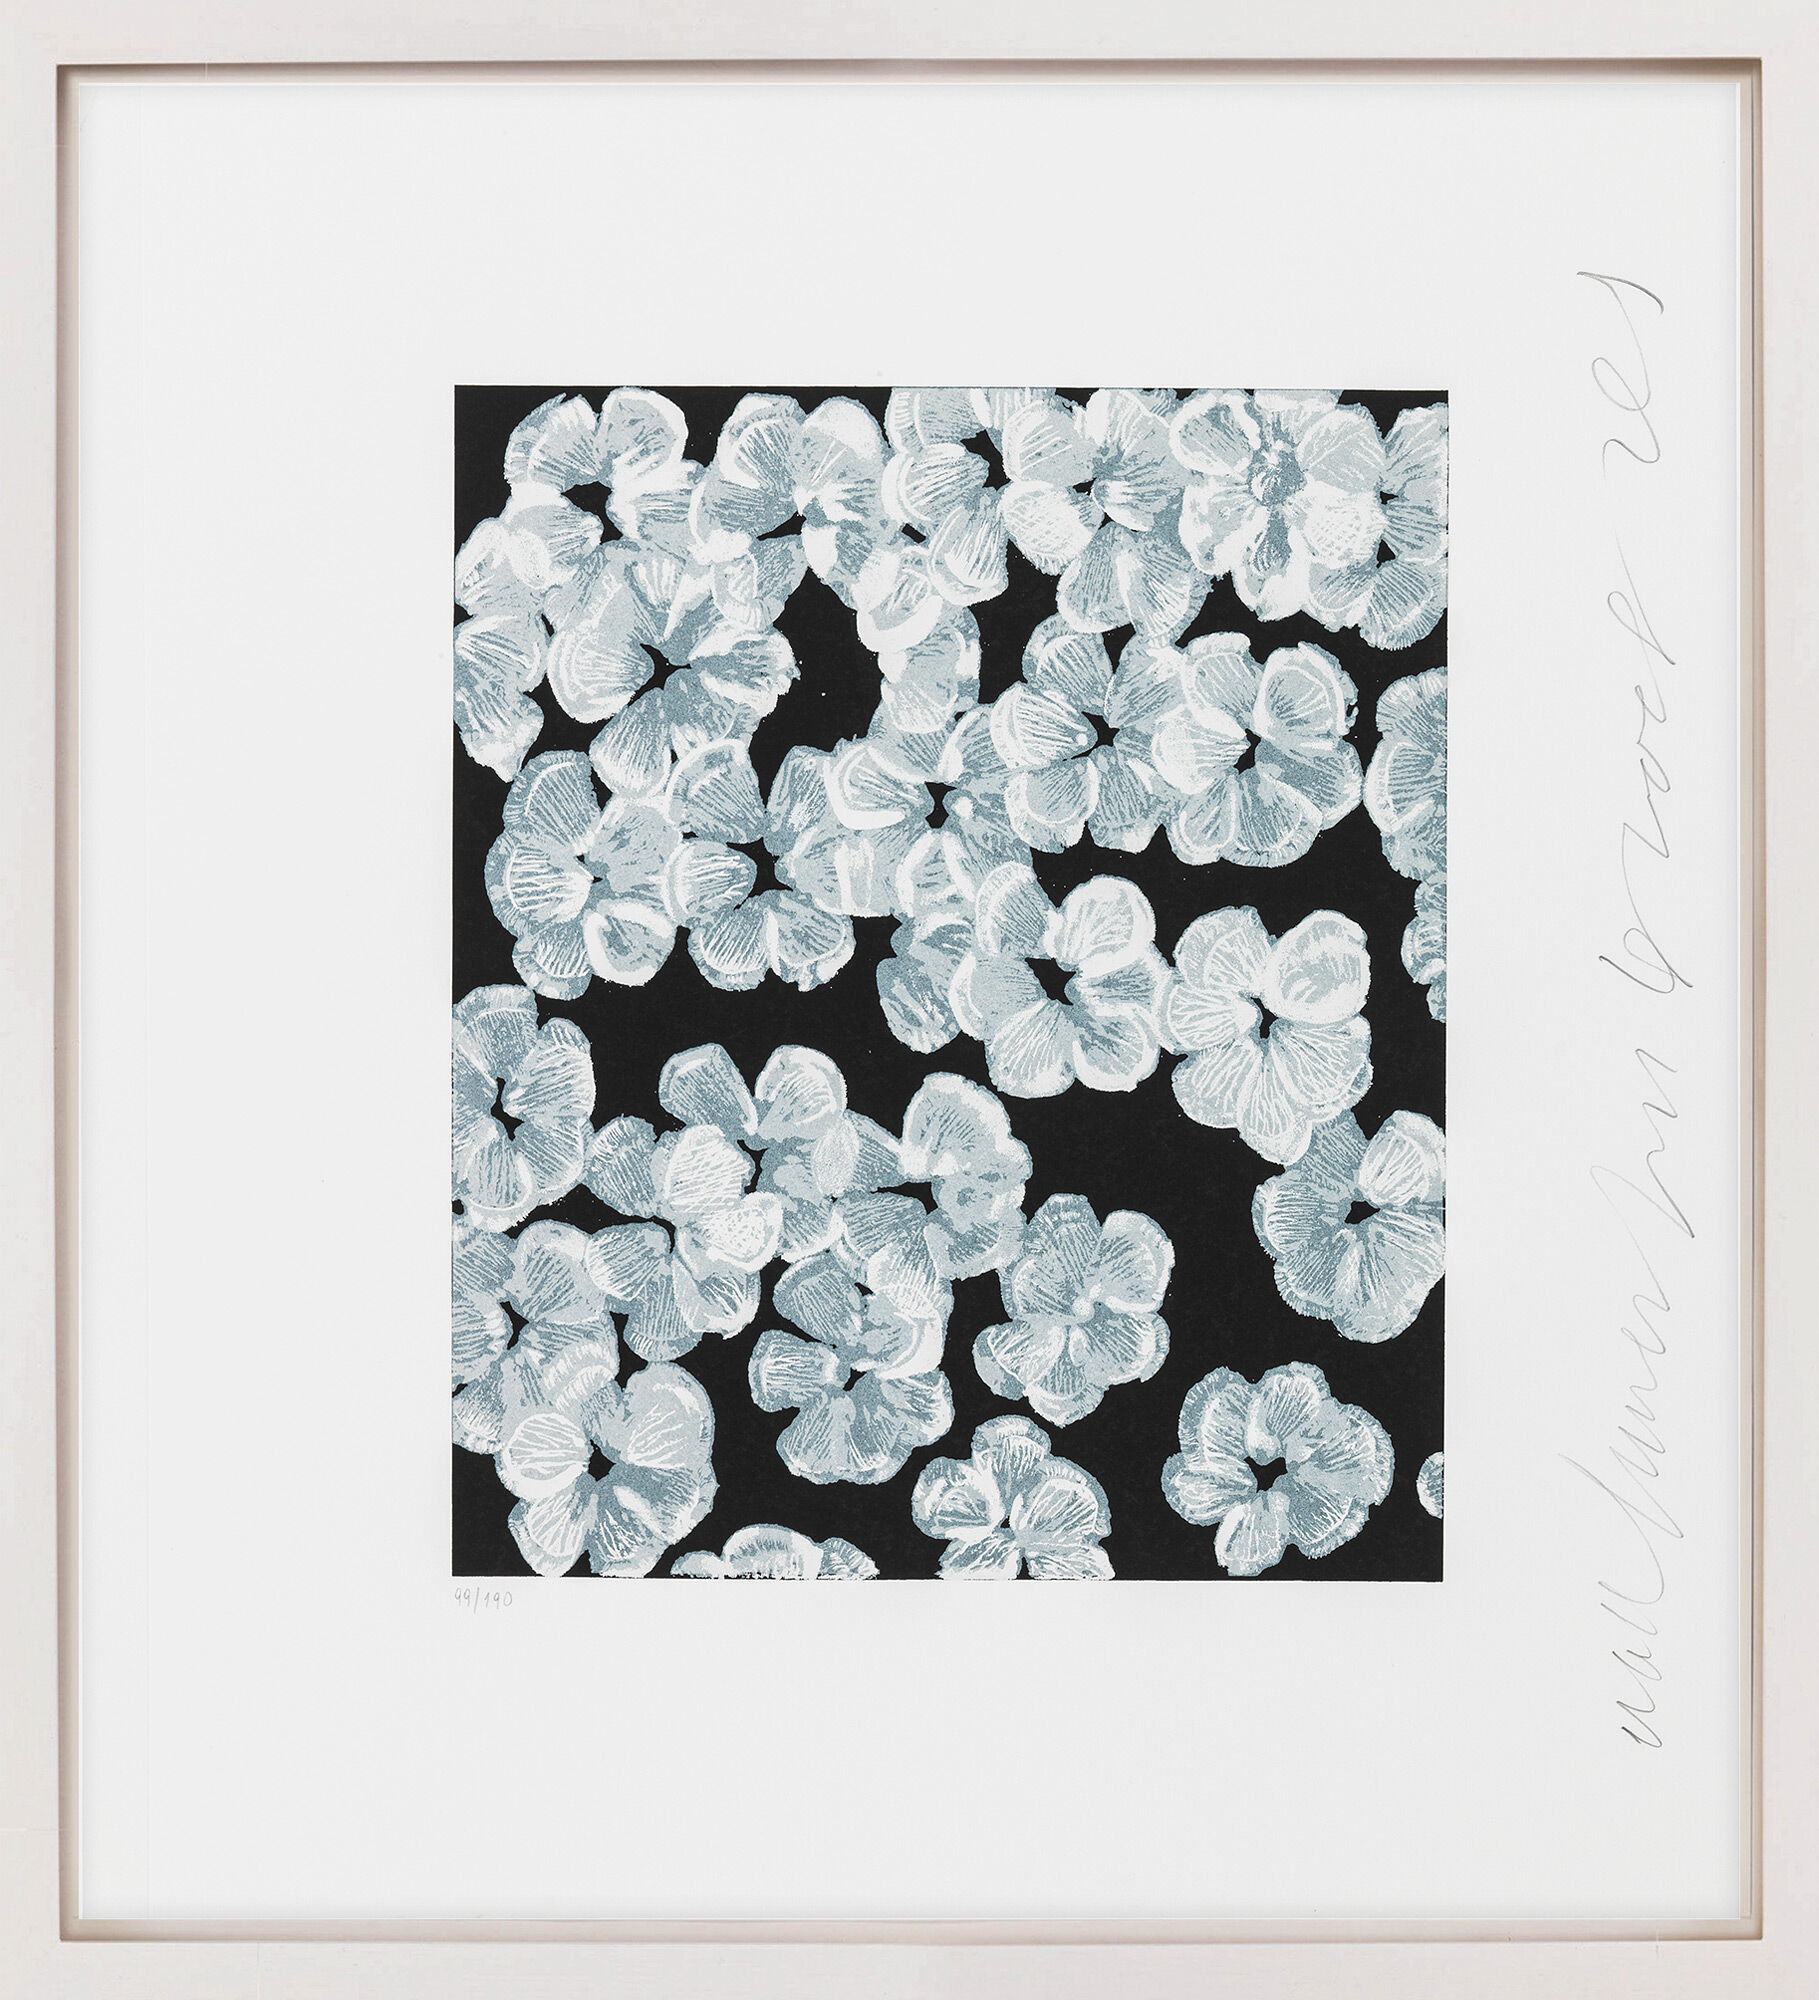 Picture "Wall flowers 8" (2008) by Donald Sultan